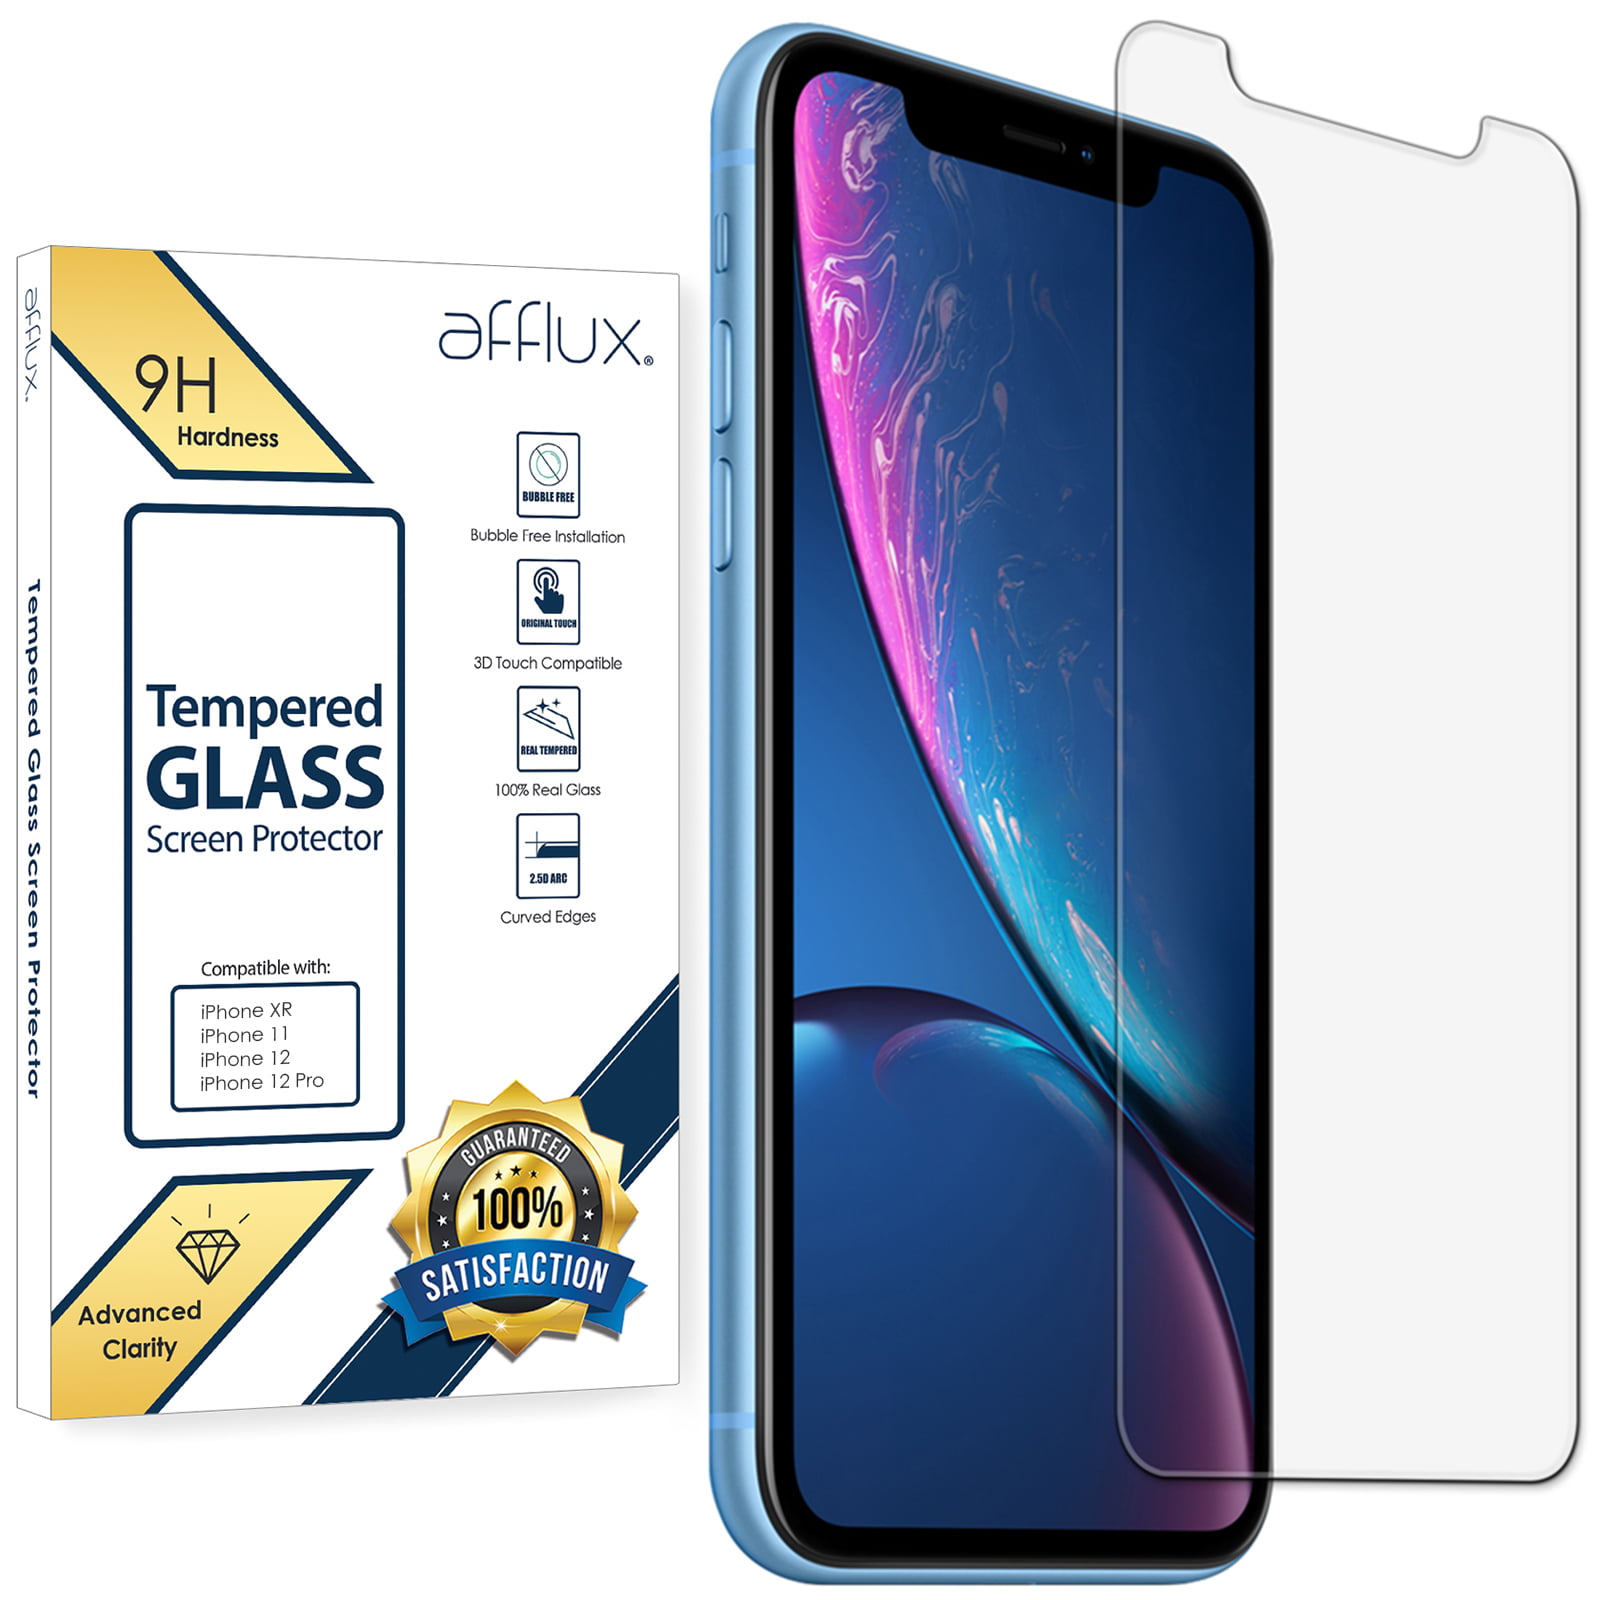 UNEXTATI HD Clear Anti Scratch Tempered Glass Film for iPhone 11 Pro Max/iPhone Xs Max 4 Pack Tempered Glass Screen Protector Compatible with iPhone 11 Pro Max/iPhone Xs Max 